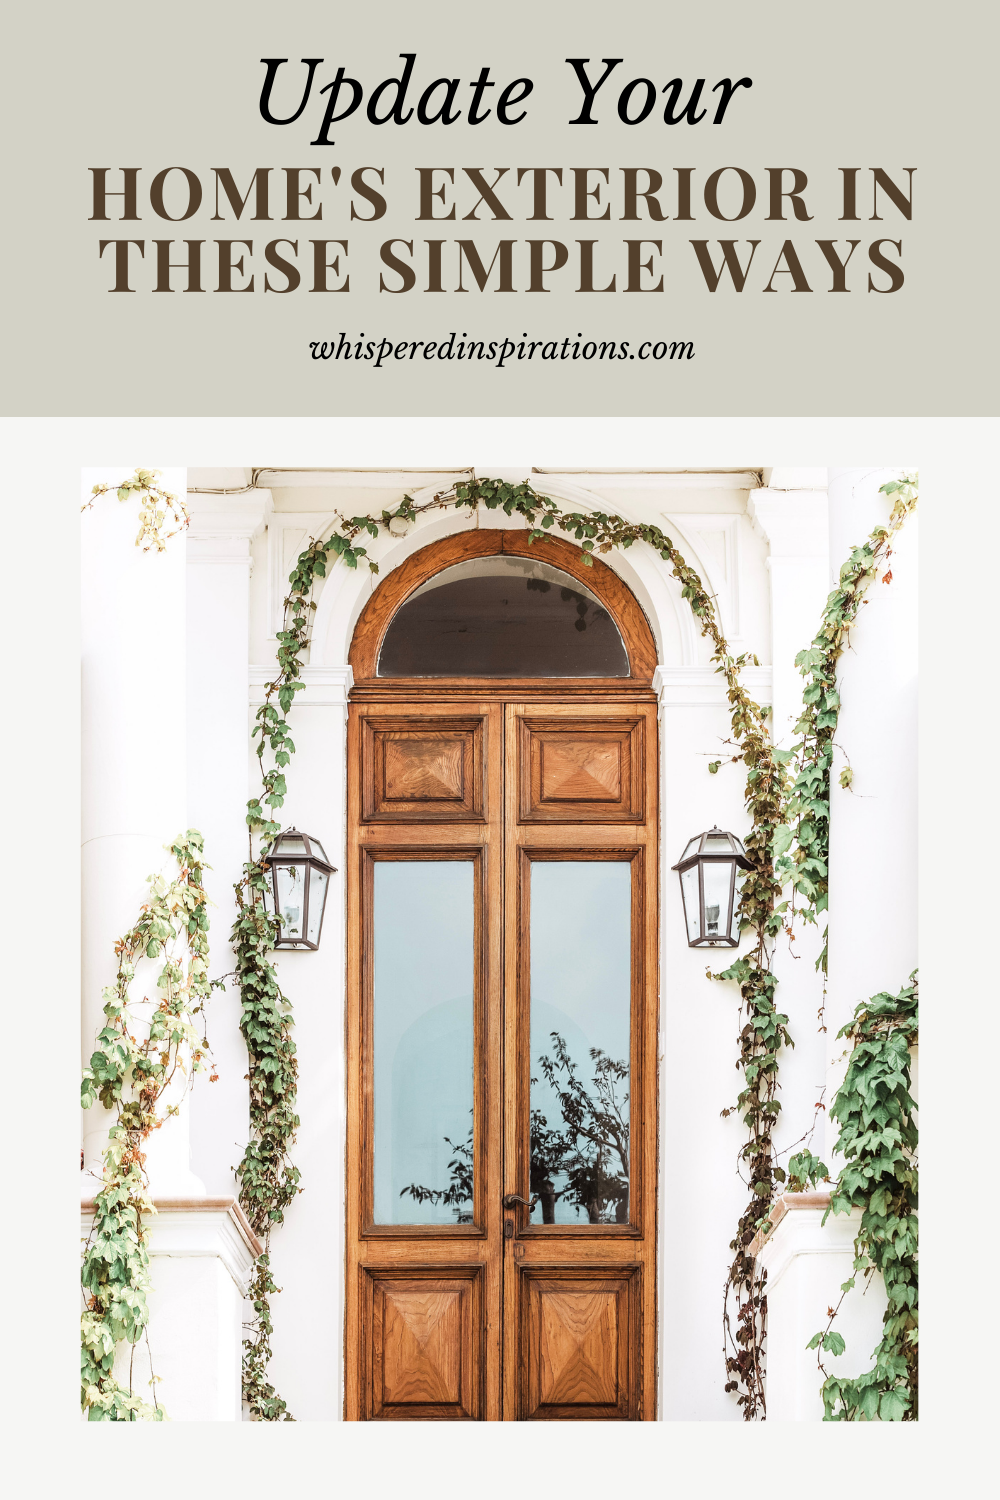 If you're looking to renovate or even sell your home, this is for you! Update your home's exterior in these super simple ways.